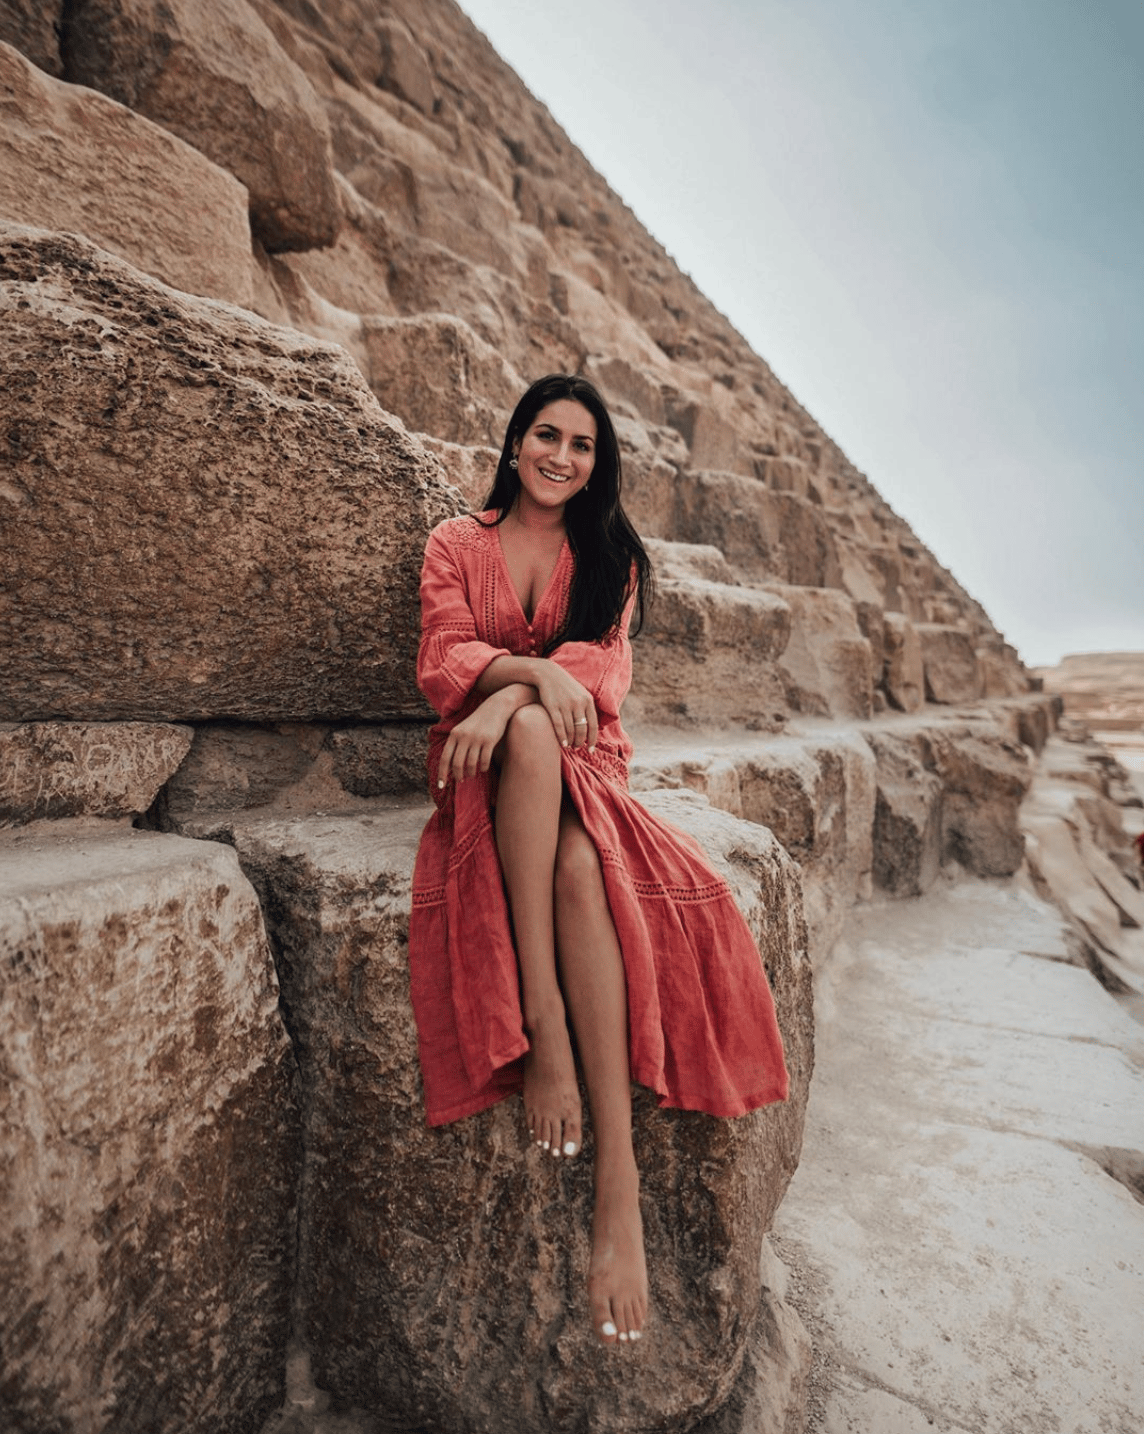 Christina Galbato, at the Great Pyramids in Egypt, has successfully transitioned from influencer to CEO